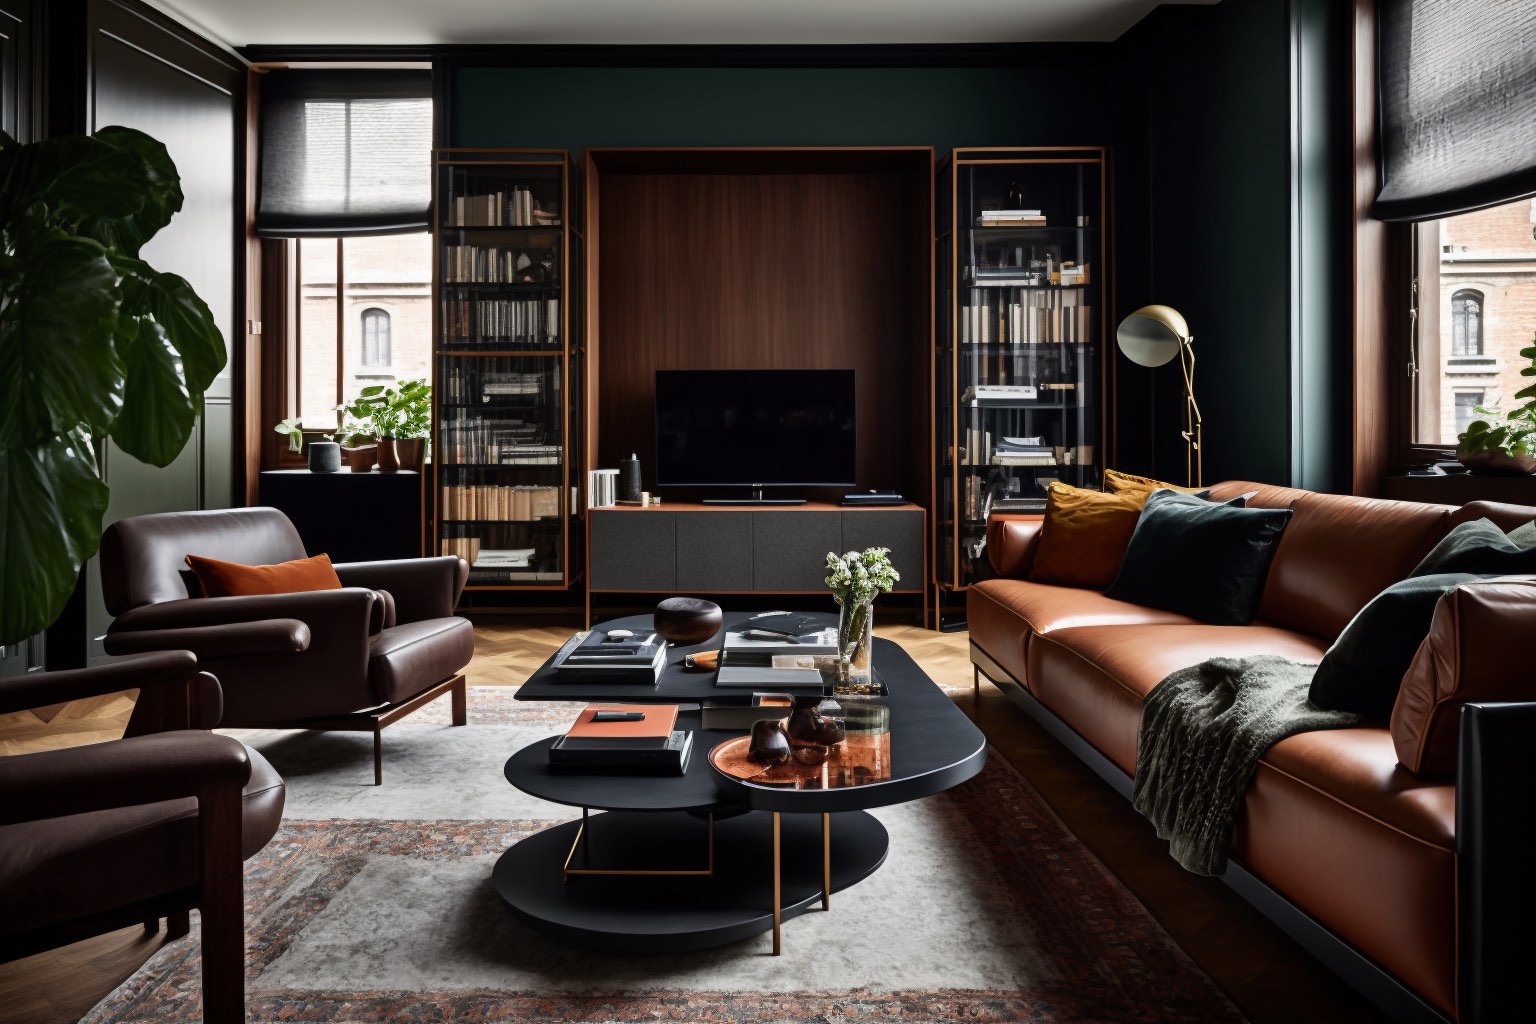 A Stylish And Sophisticated Living Room Featuring The Iconic Italian Designer Furniture Of Molteni C